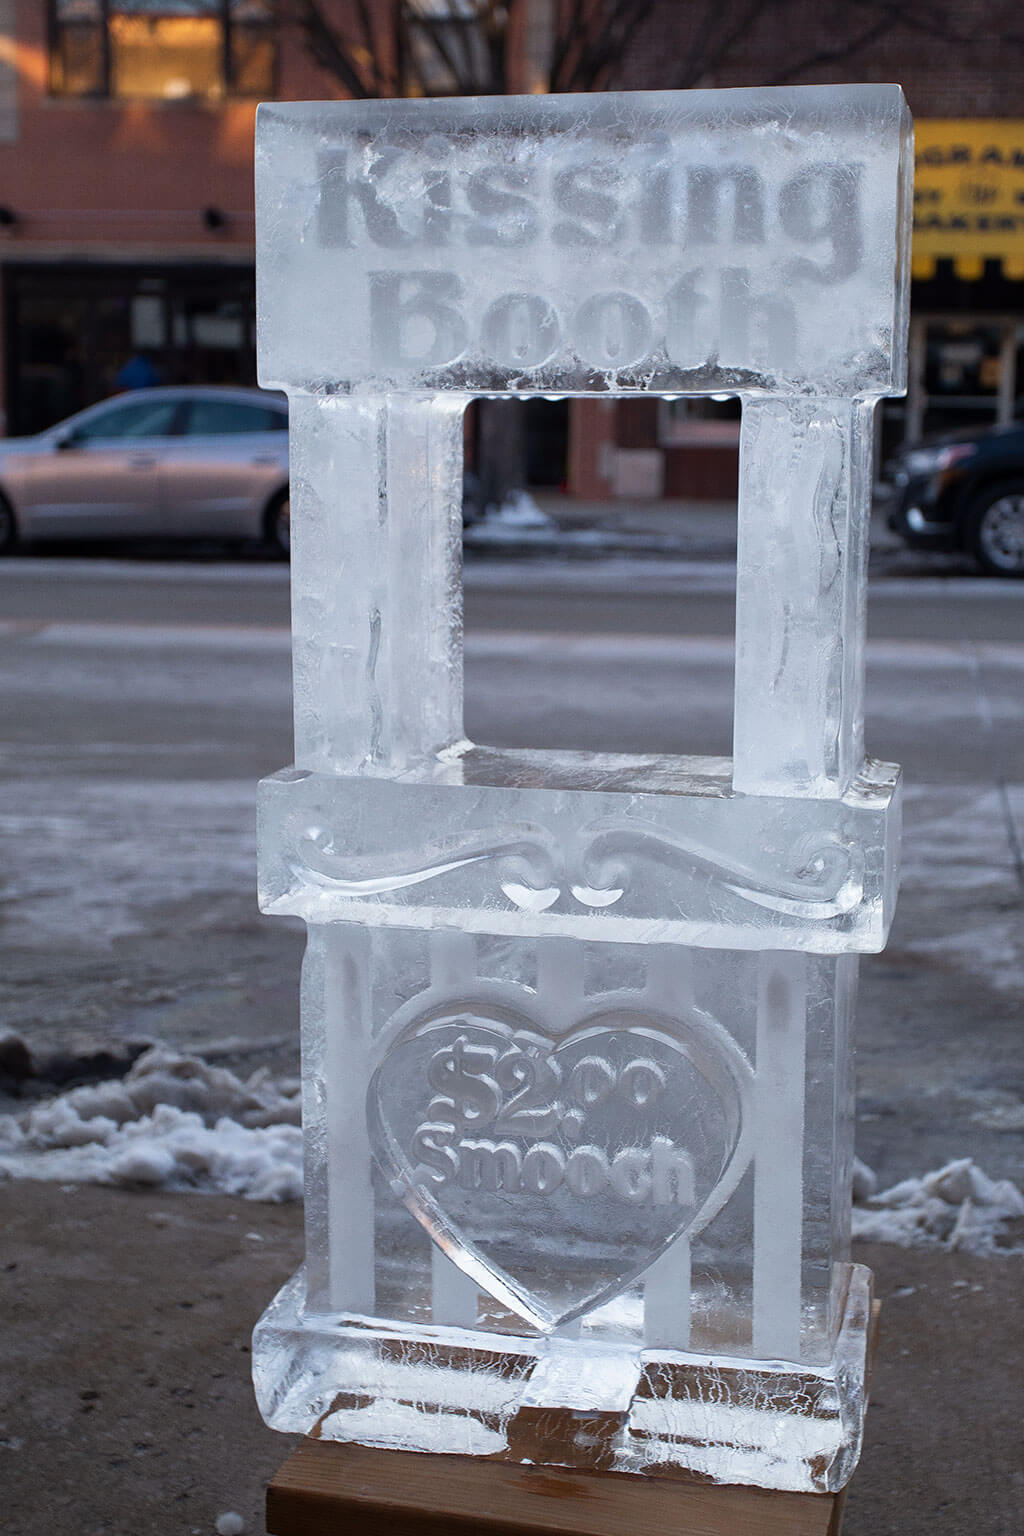 drive-swim-fly-downers-grove-chicago-illinois-ice-sculpture-downtown-businesses-kissing-booth